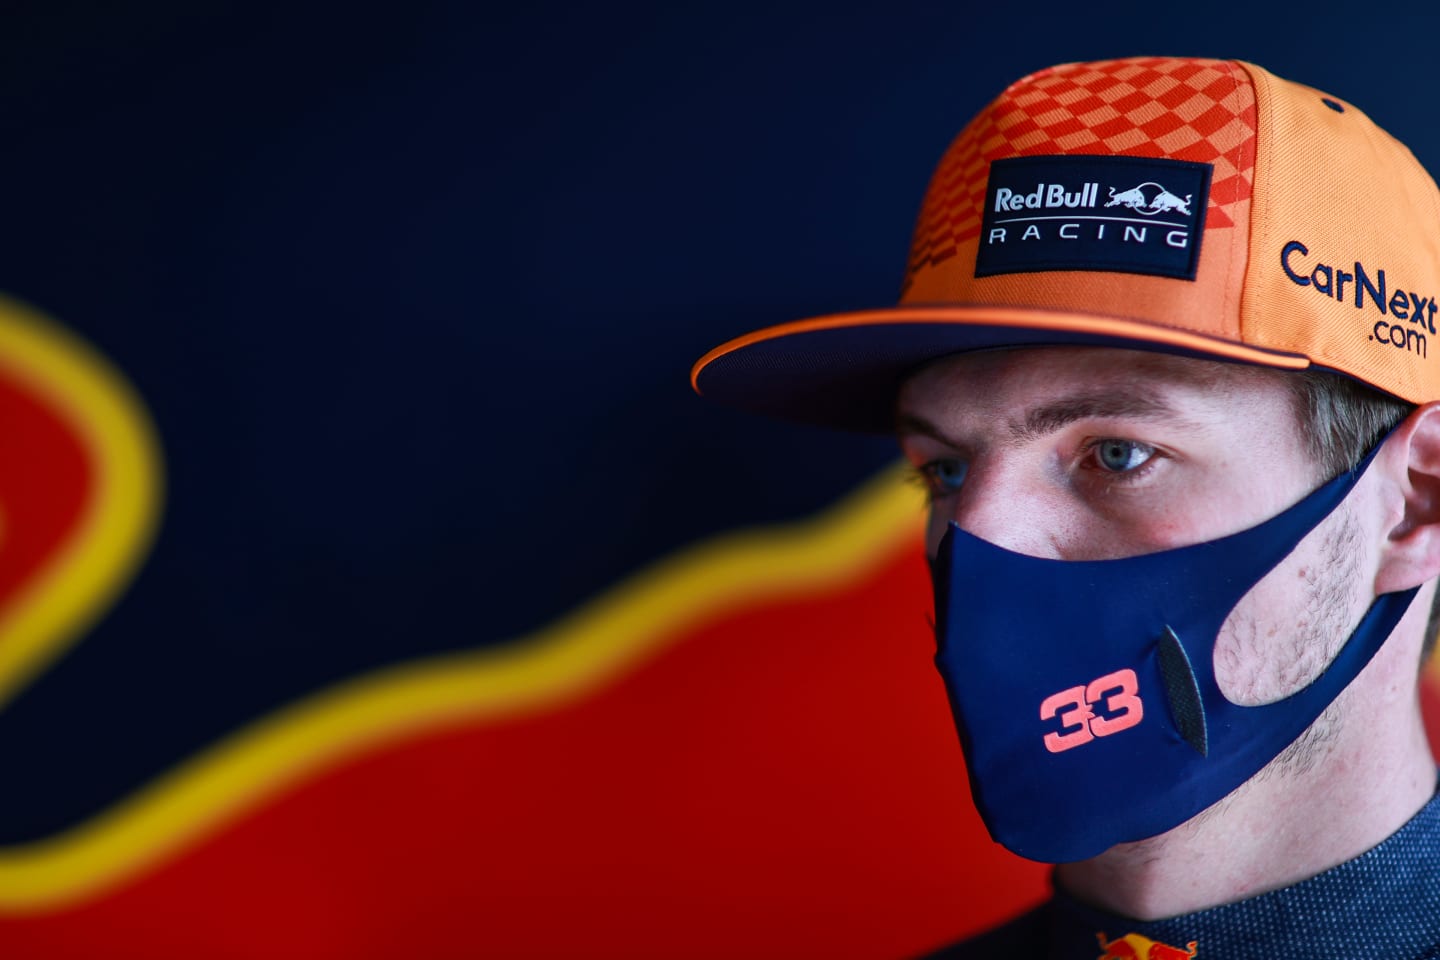 LE CASTELLET, FRANCE - JUNE 18: Max Verstappen of Netherlands and Red Bull Racing looks on in the